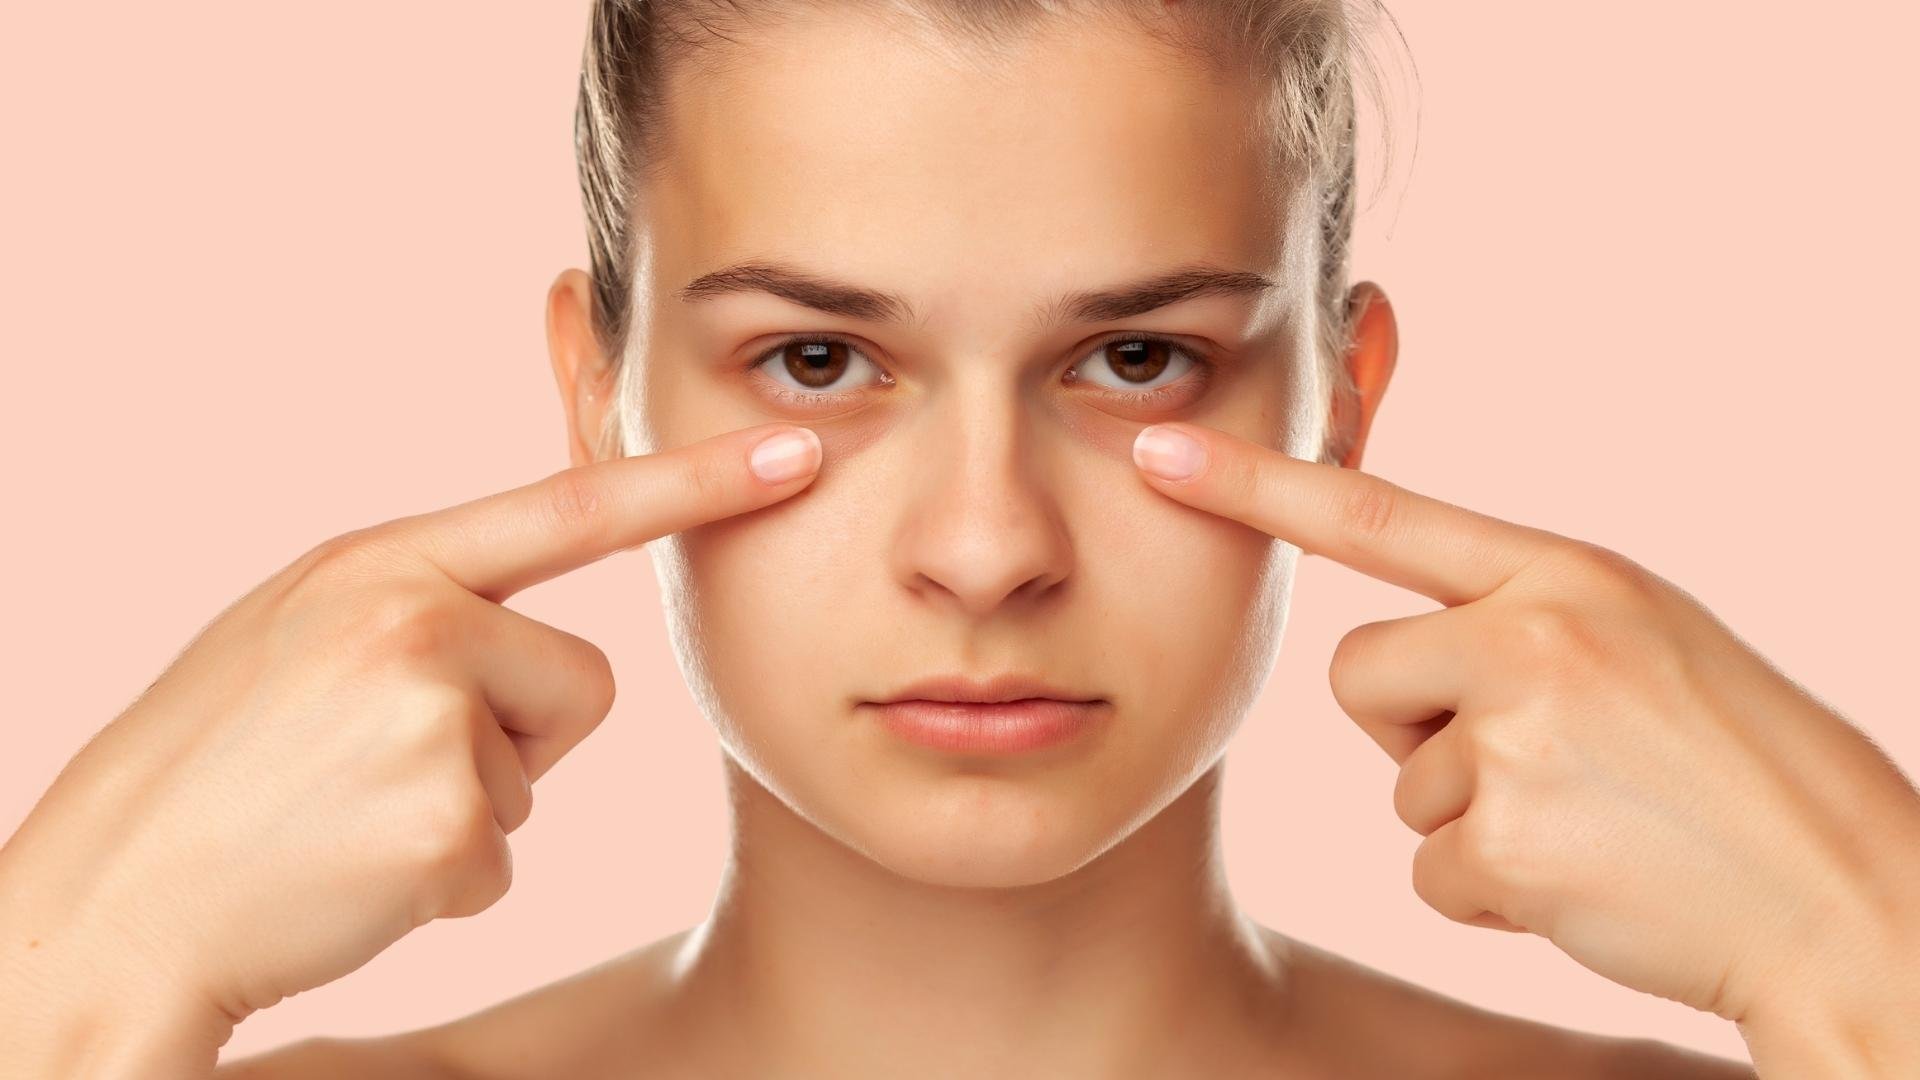 How To Get Rid Of Dark Circles Products? A Detailed Guide